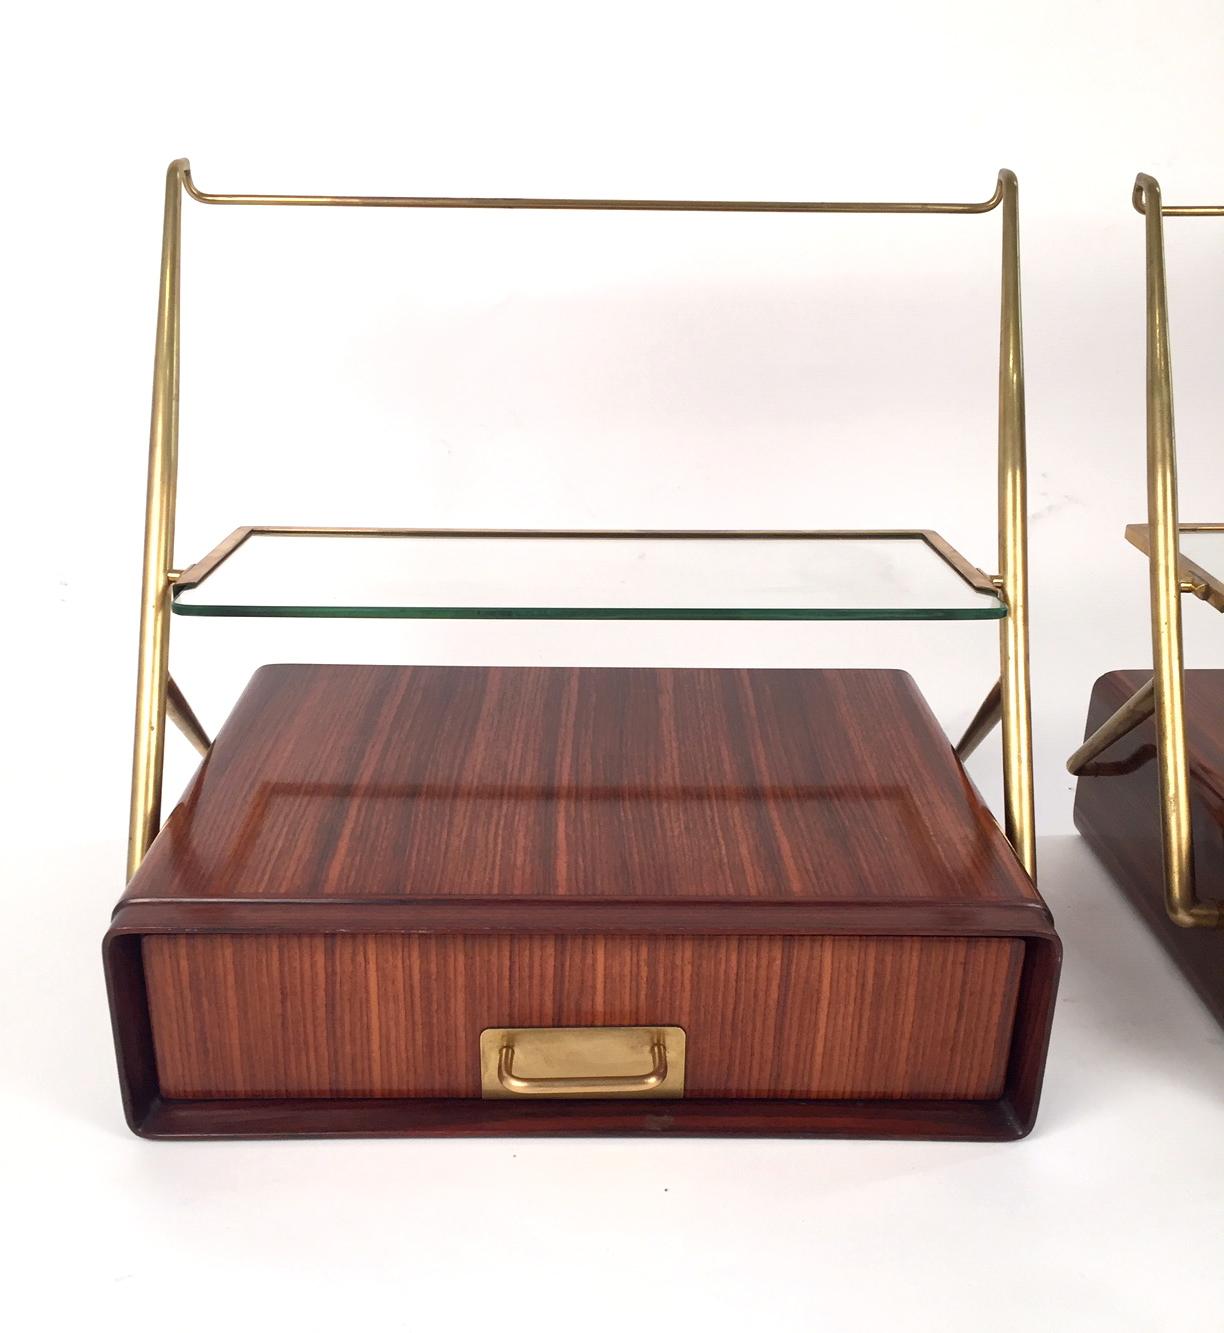 Pair of wall bedsides designed in 1955 by Silvio Cavatorta. Wood, glass and brass structure.
Lit. Il Mobile italiano degli anni 40 e 50, Guttry, ppg 136-137.